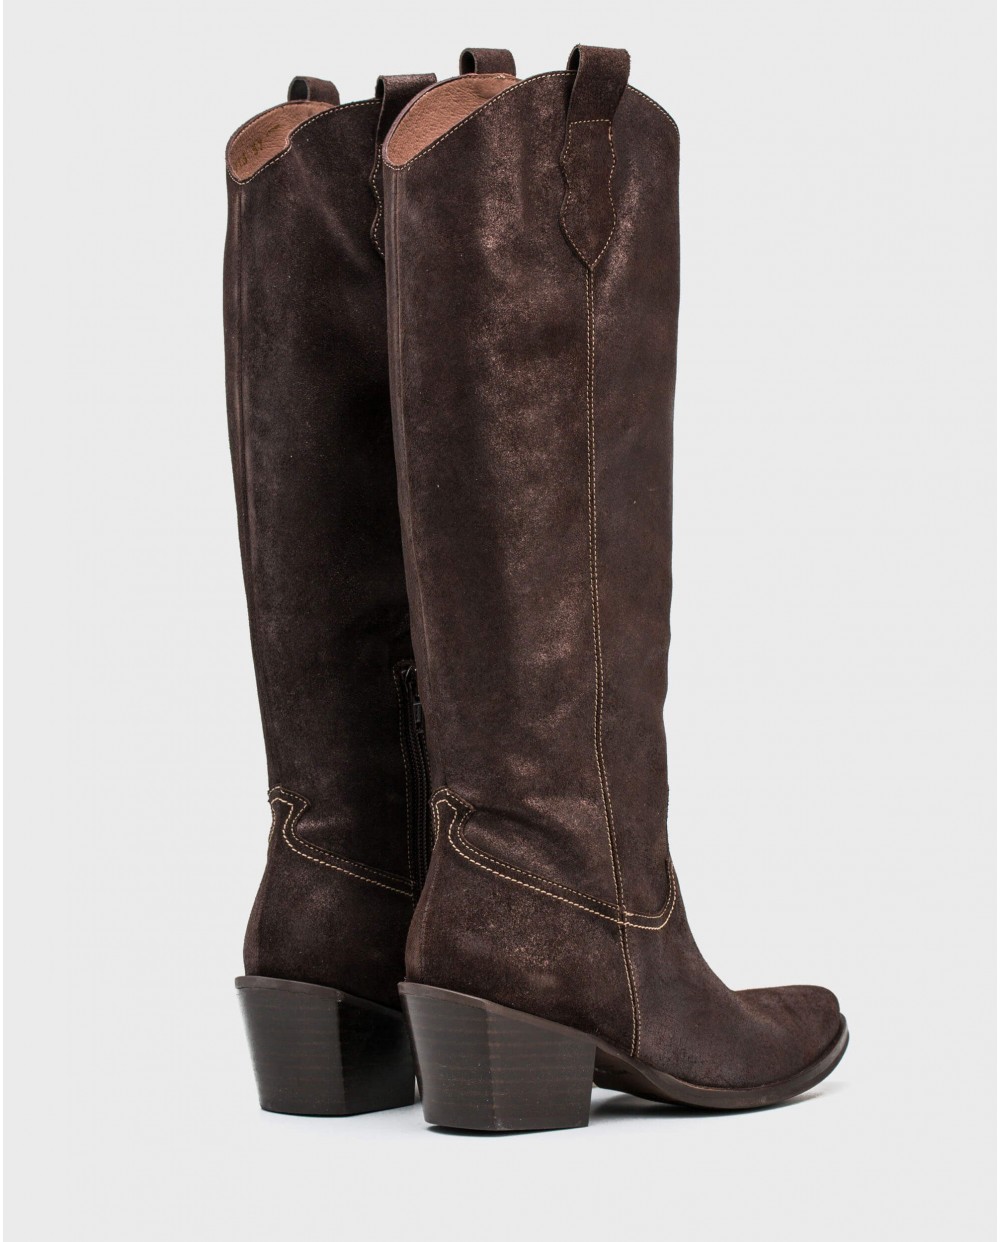 Wonders-Outlet-Metallic leather cowboy boot